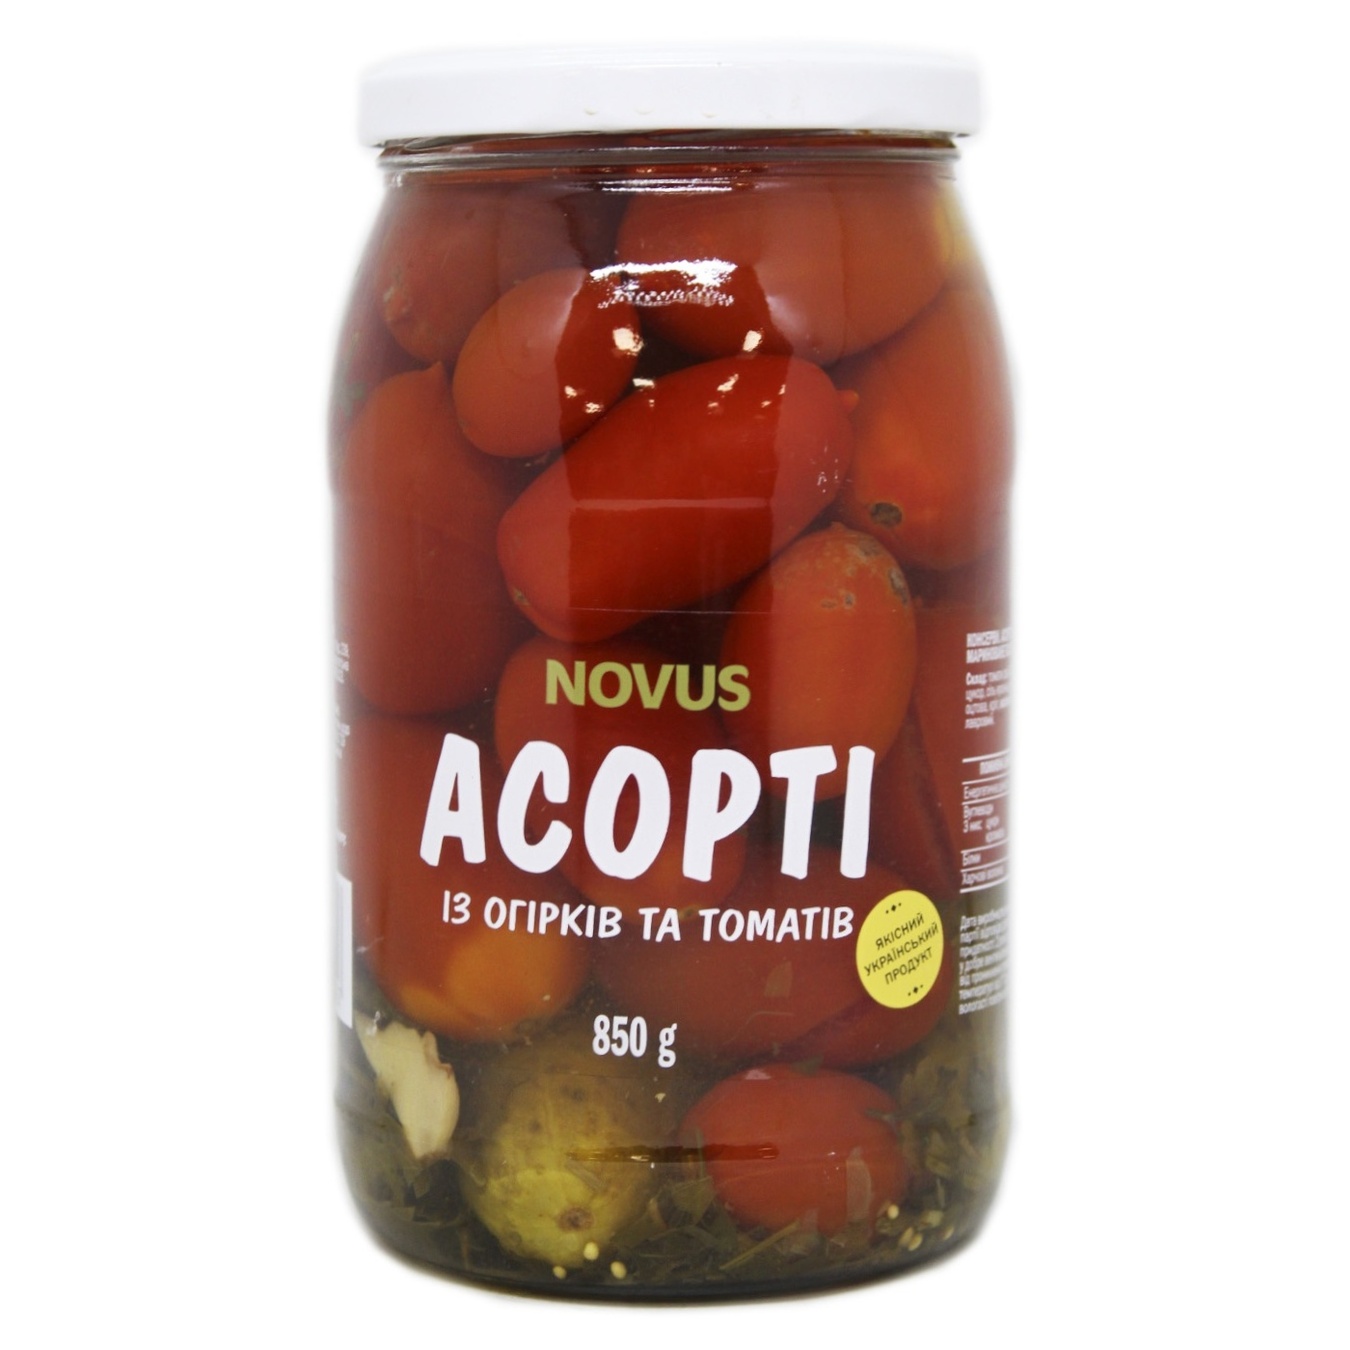 Assorted Novus tomatoes and pickled cucumbers 850g